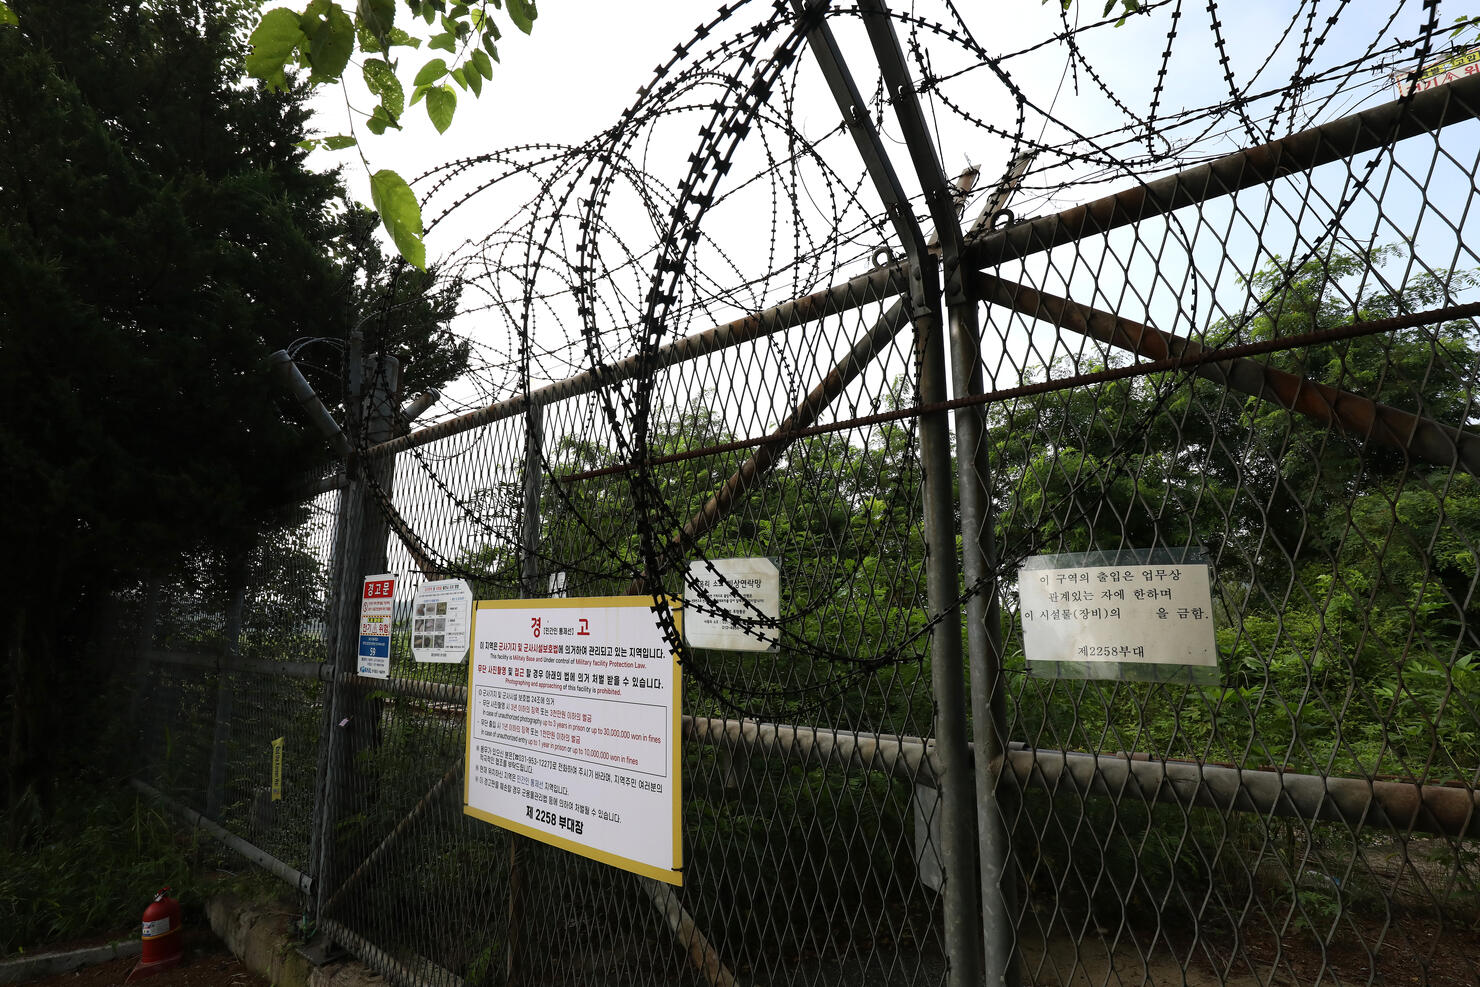 View Of The Demilitarized Zone Between North And South Koreas After American Citizen Detained In North